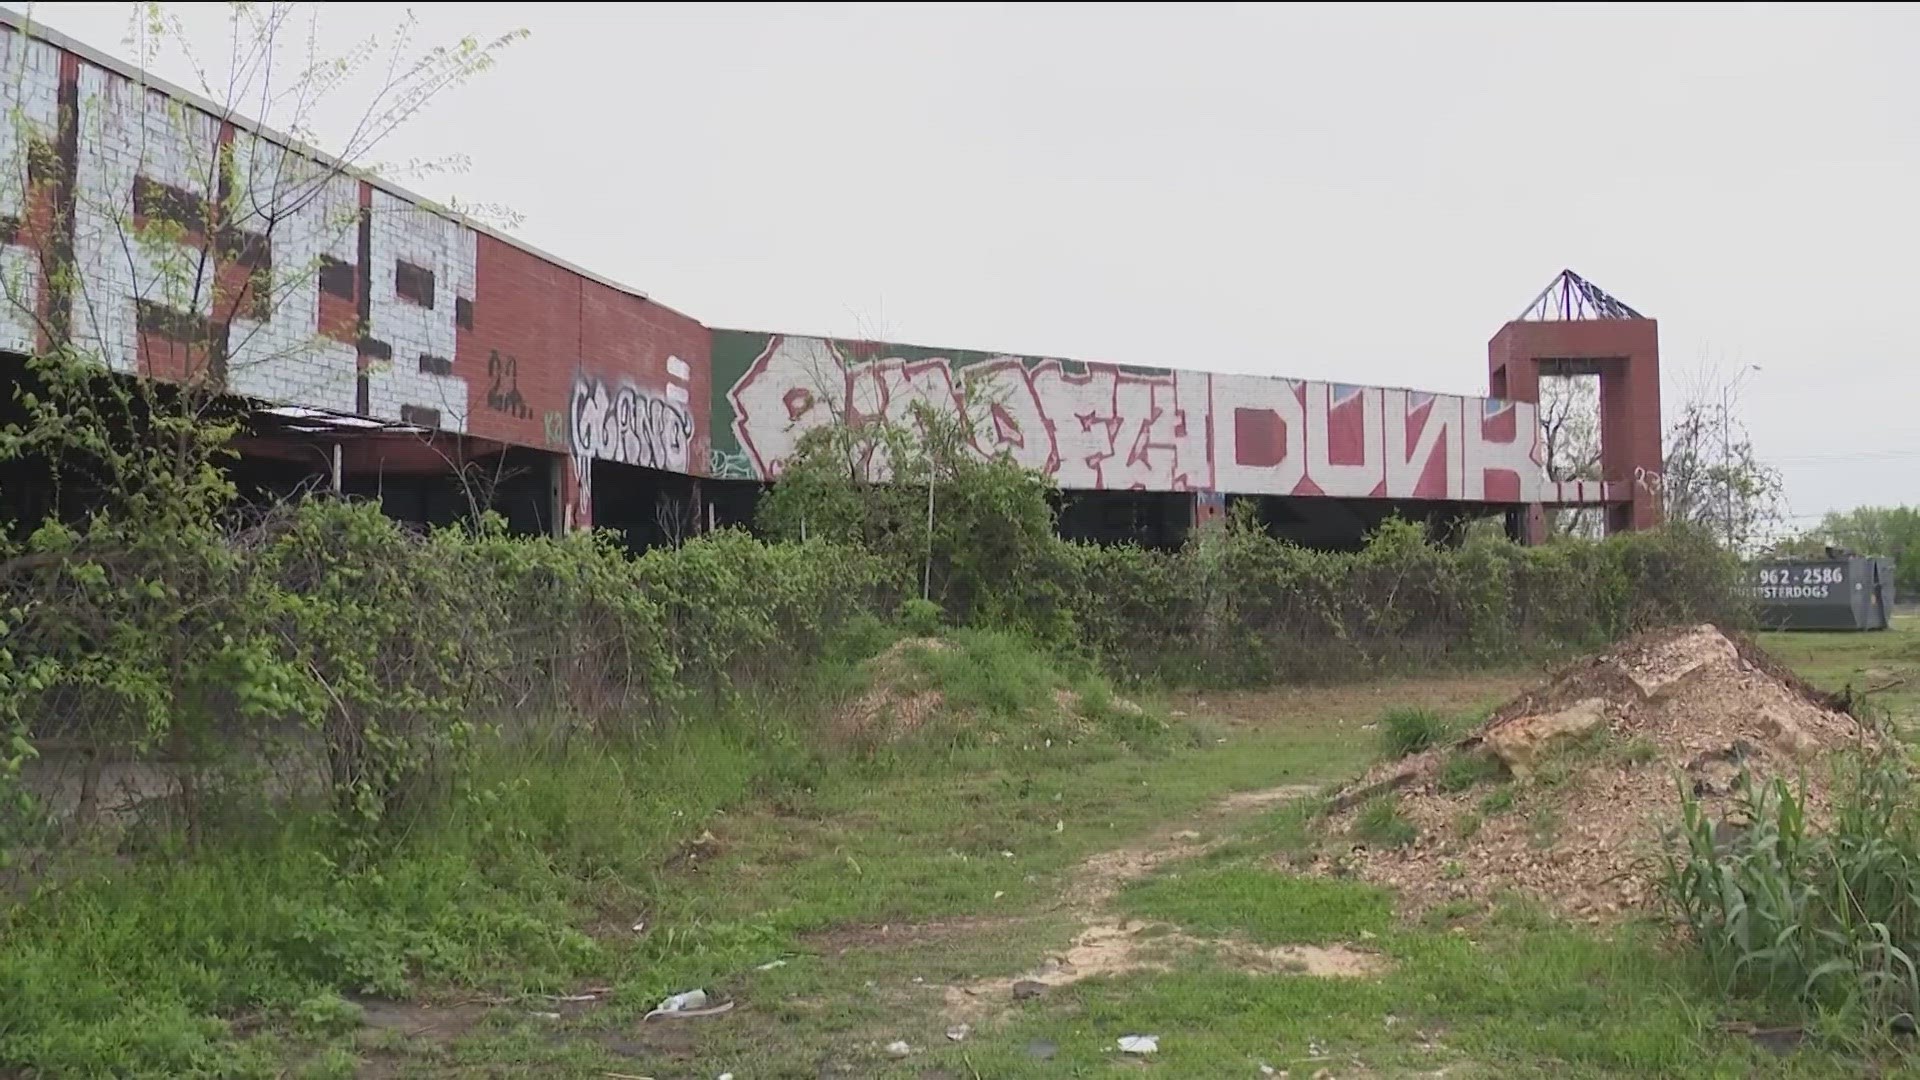 An Austin realty group wants to breathe new life into a property that's been sitting abandoned in East Austin for about 40 years.